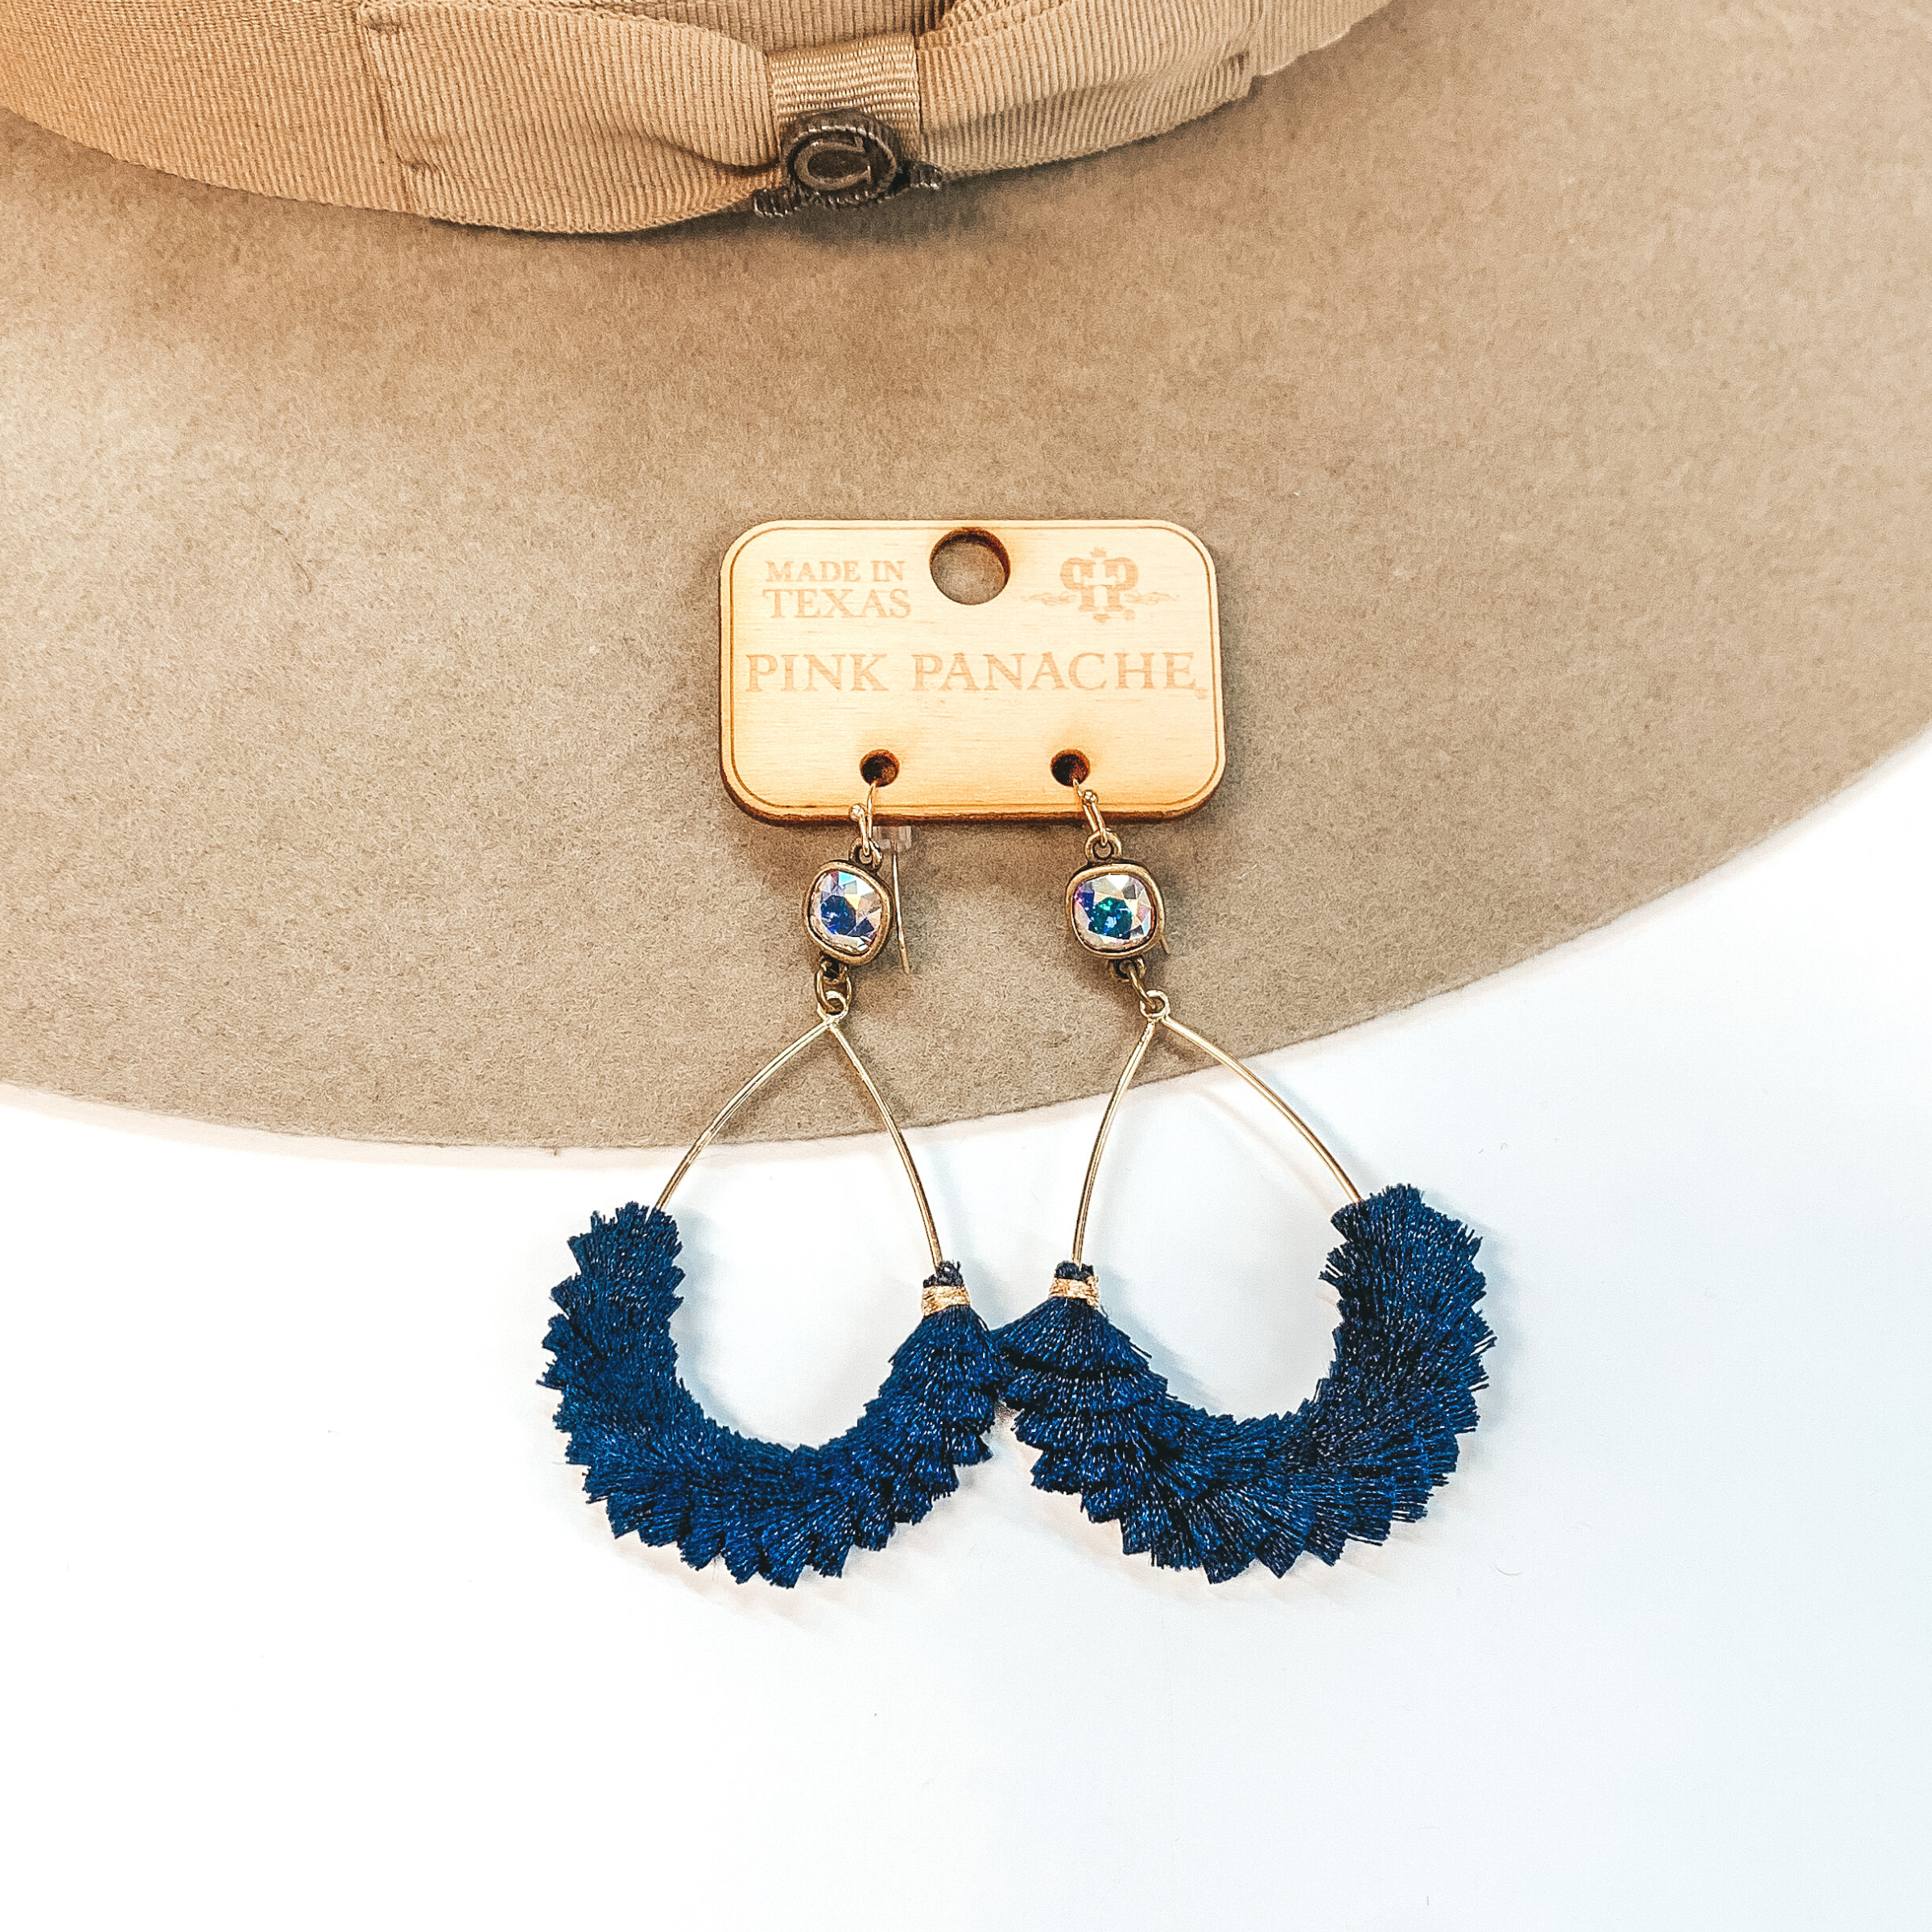 A pair of gold teardrop earrings with an AB cushion cut crystal and navy blue fringe detailing. Pictured on white background with a beige hat.